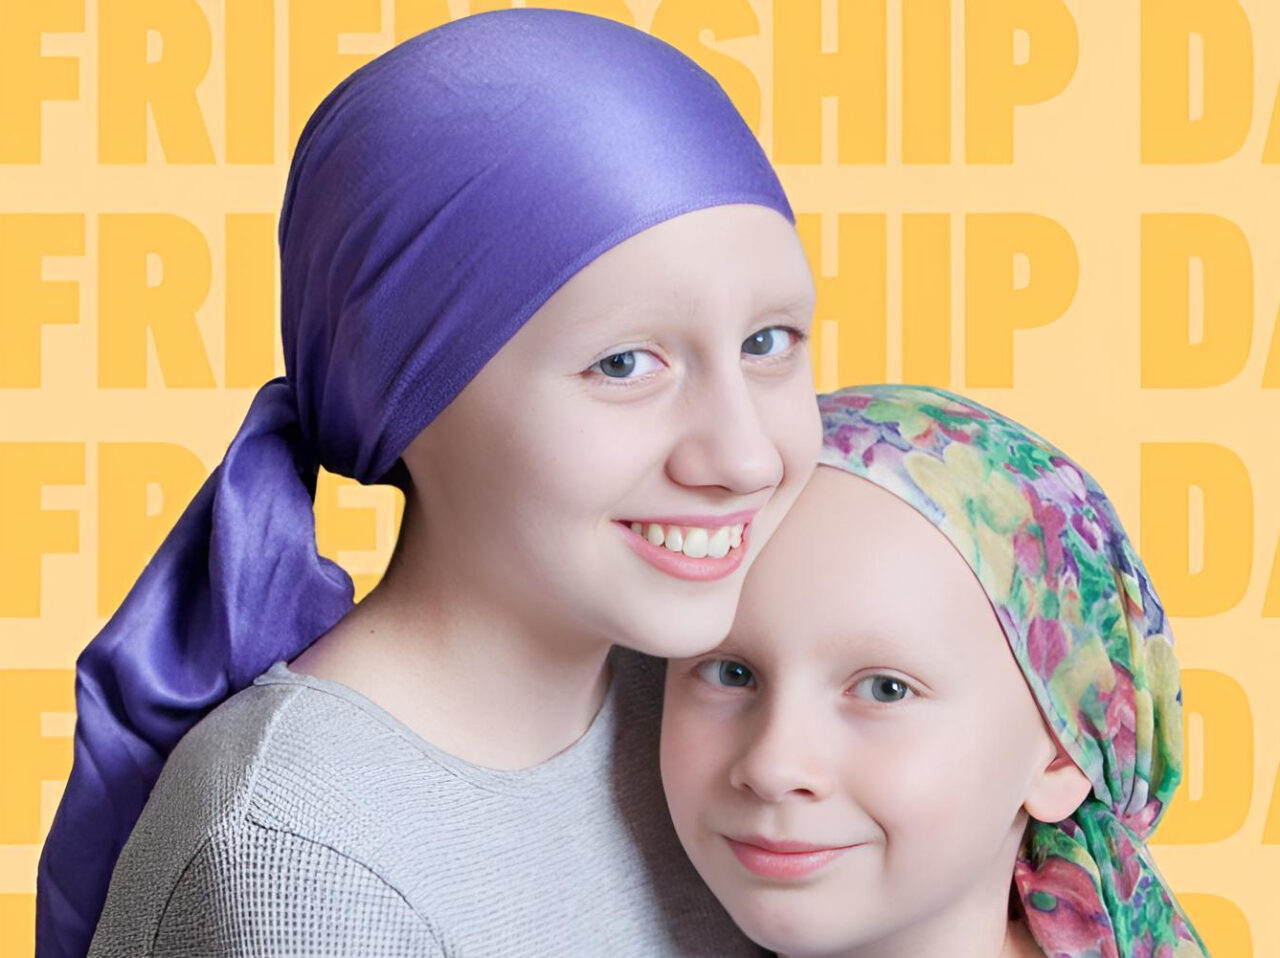 Friends’ presence, kindness, and encouragement can make a difference during the toughest times – Childhood Cancer International